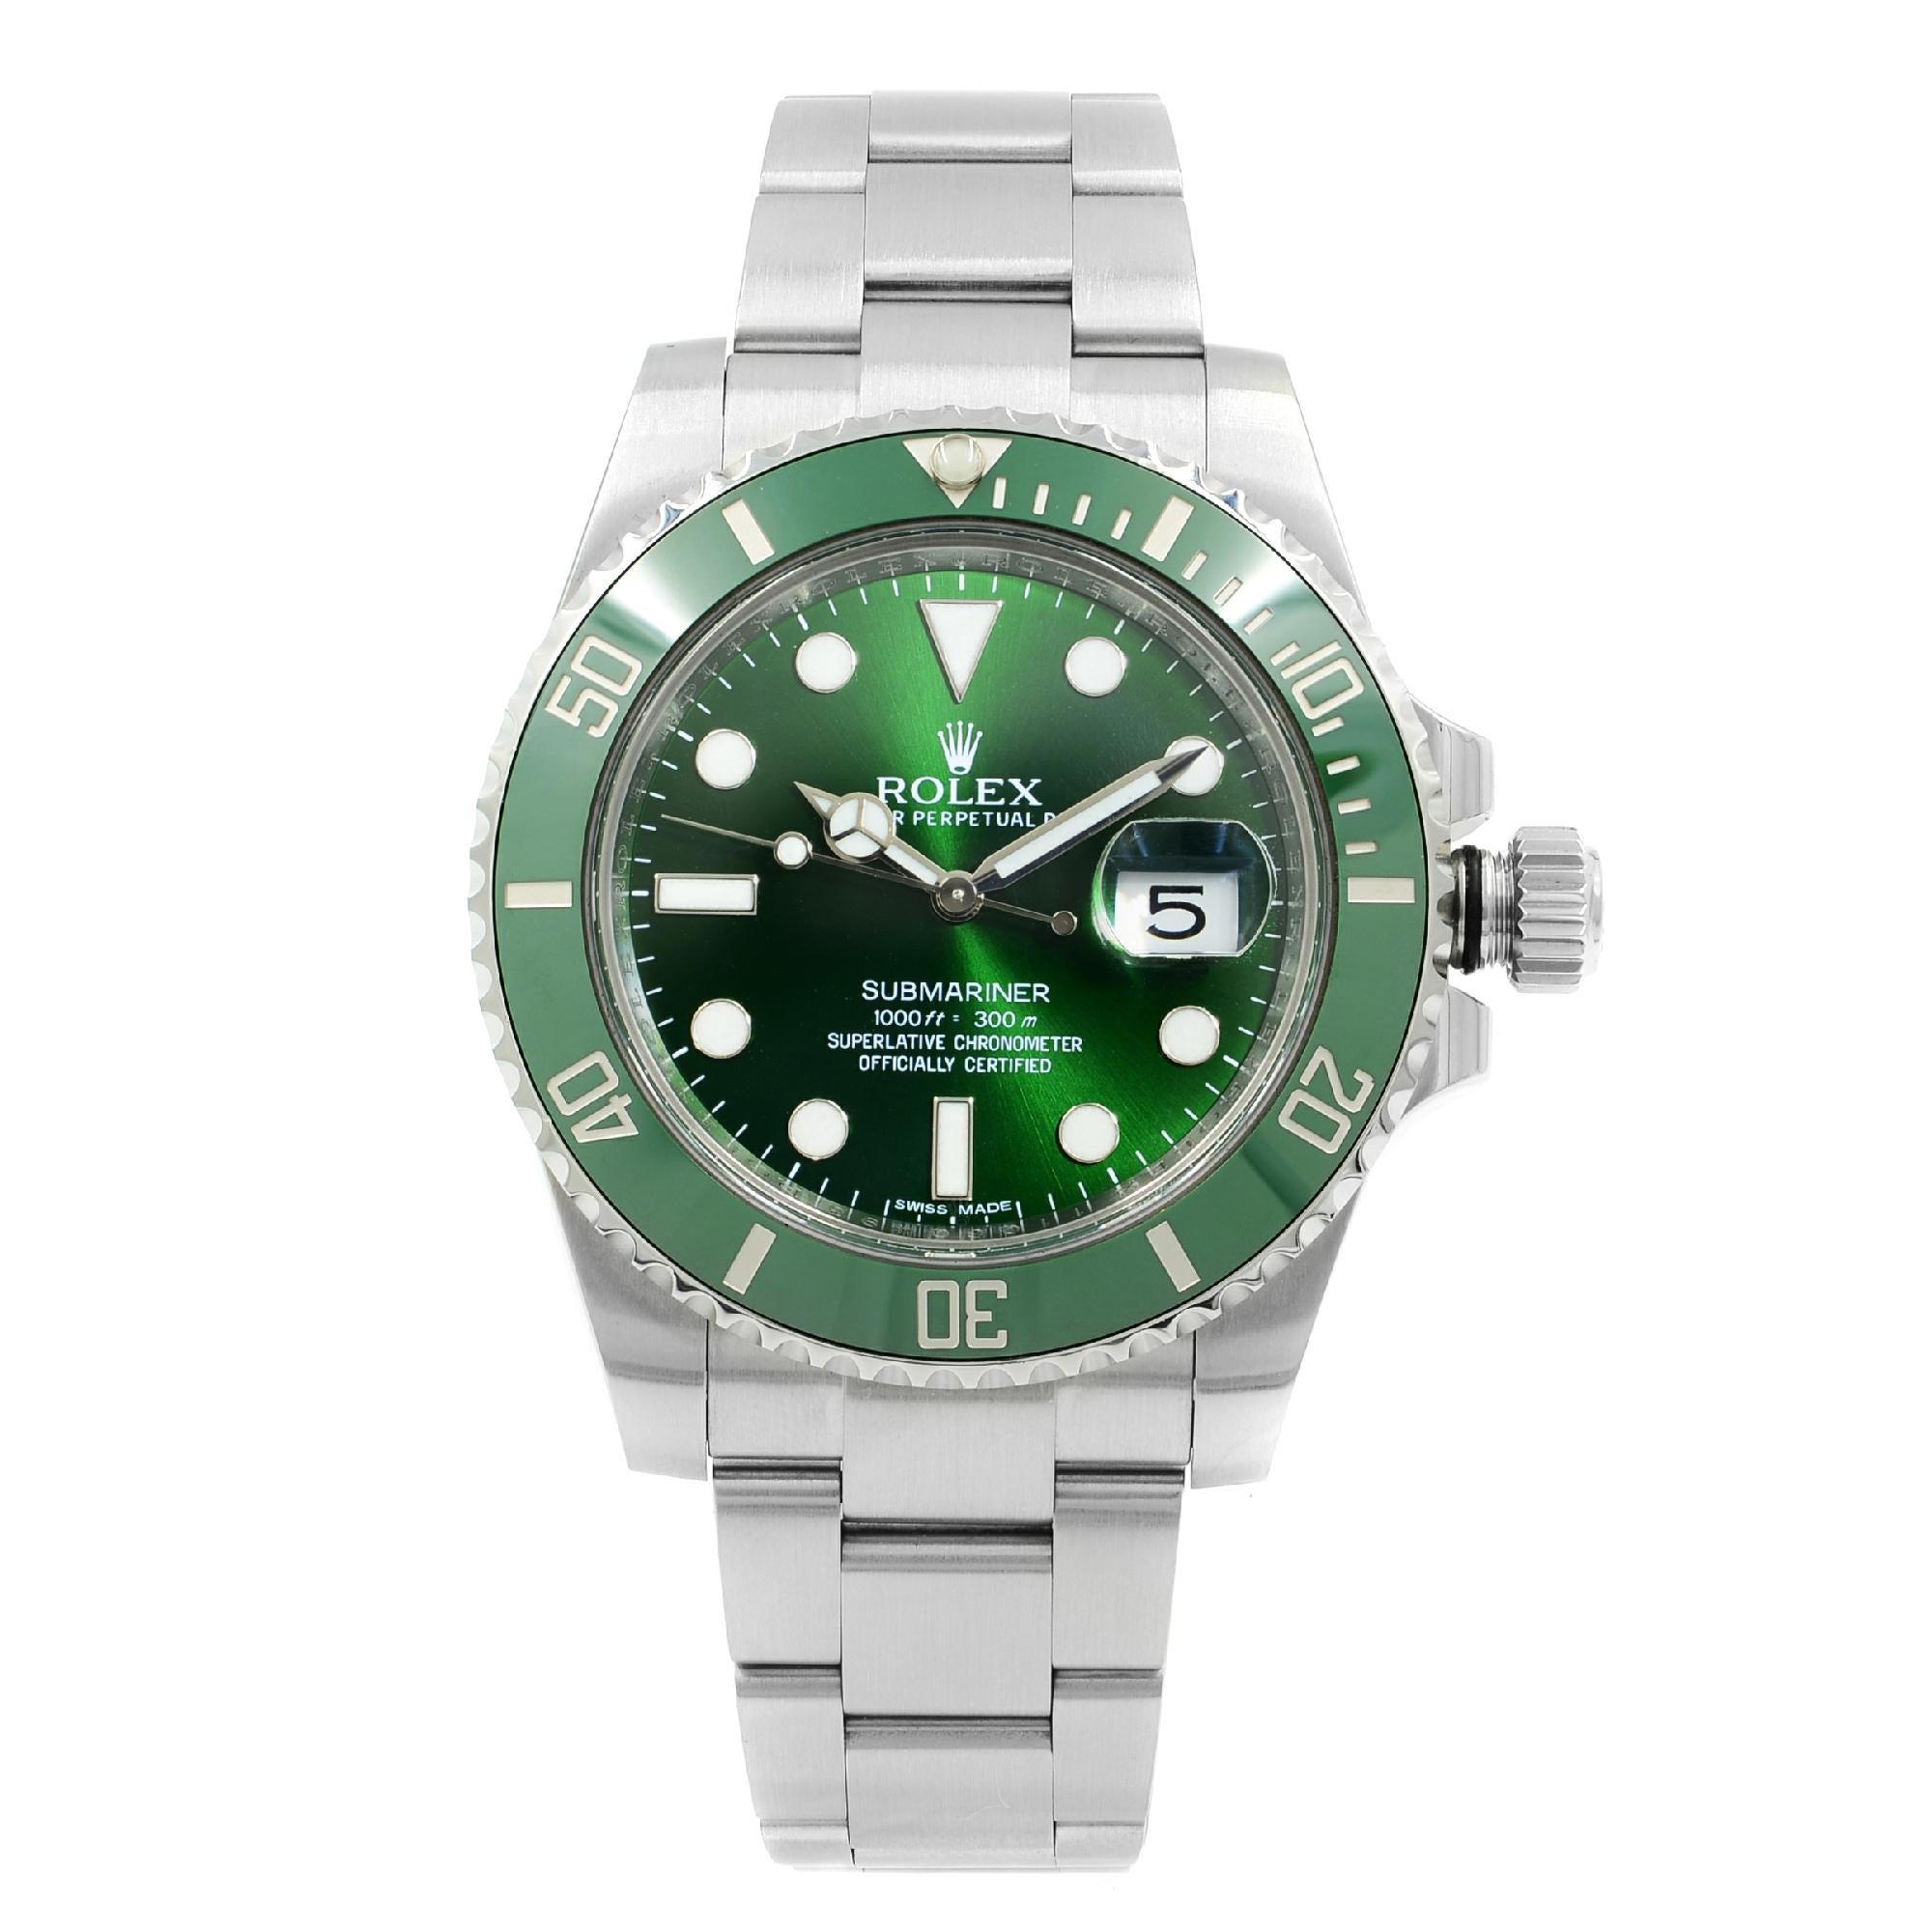 This pre-owned Rolex Submariner  116610LV is a beautiful men's timepiece that is powered by mechanical (automatic) movement which is cased in a stainless steel case. It has a round shape face, date indicator dial and has hand sticks & dots style